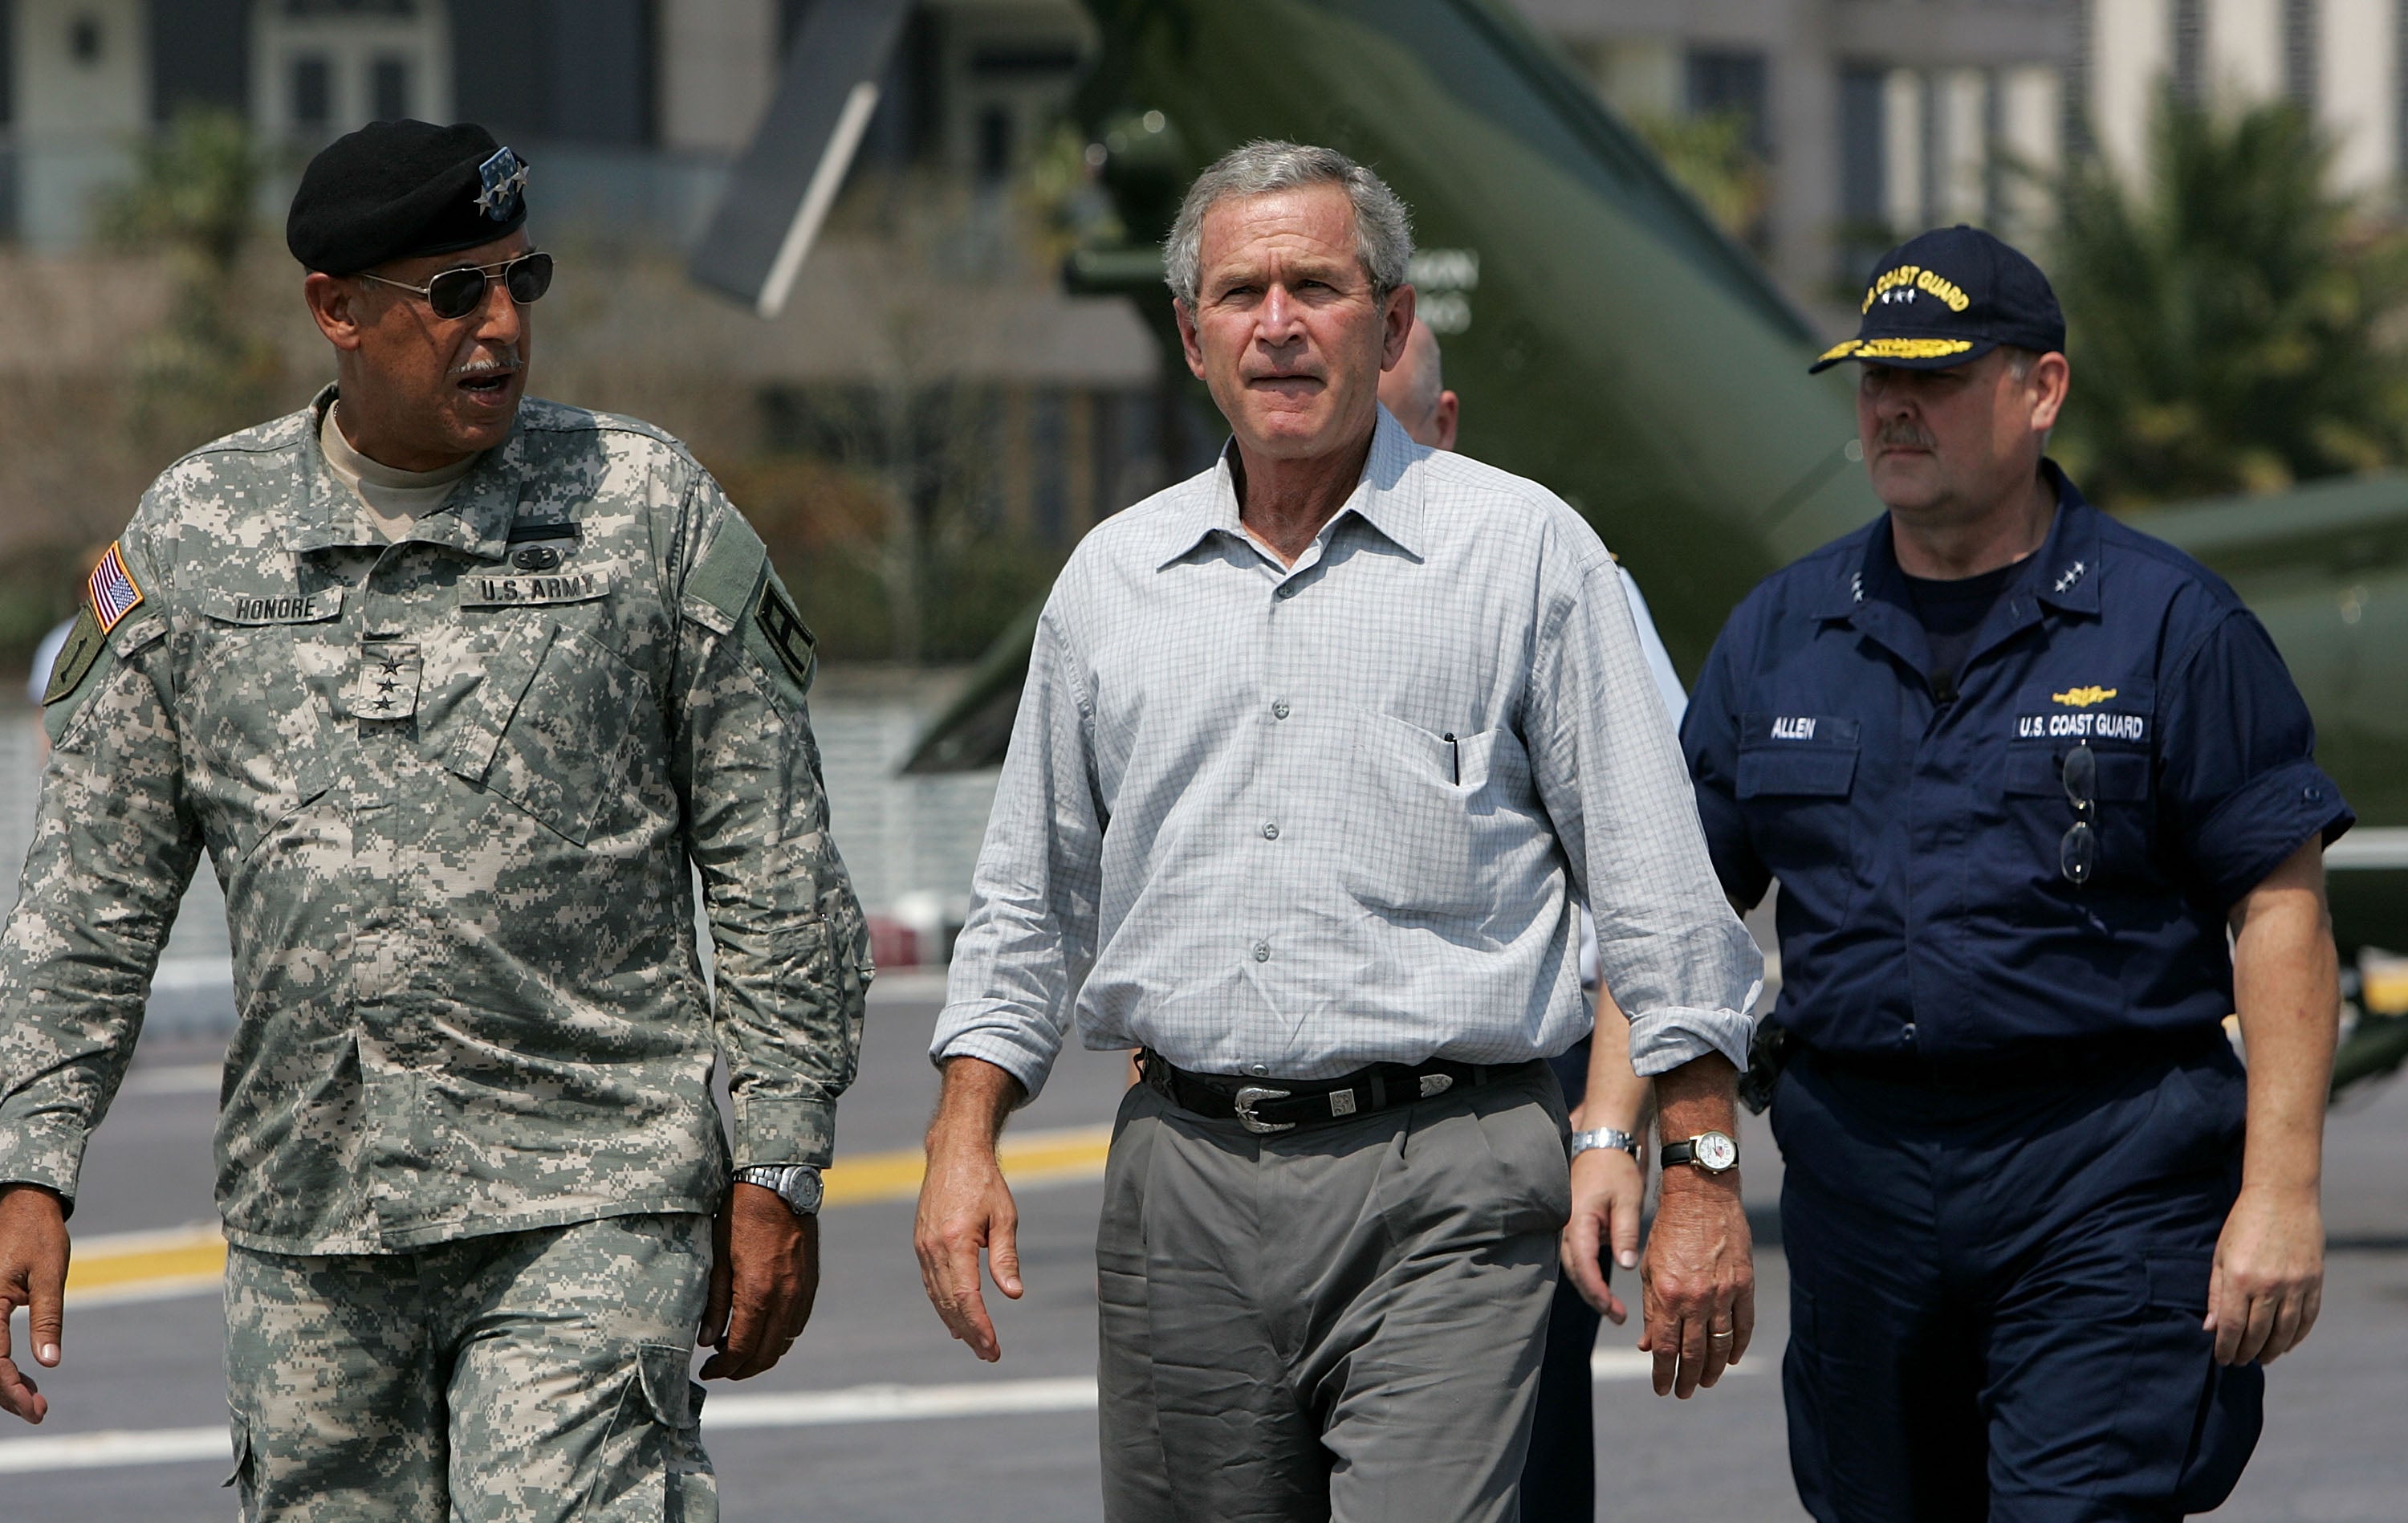 Lt. General Russel Honoré (left), with former president George W Bush, in the aftermath of 2005’s Hurricane Katrina. The Army veteran led recovery operations in New Orleans